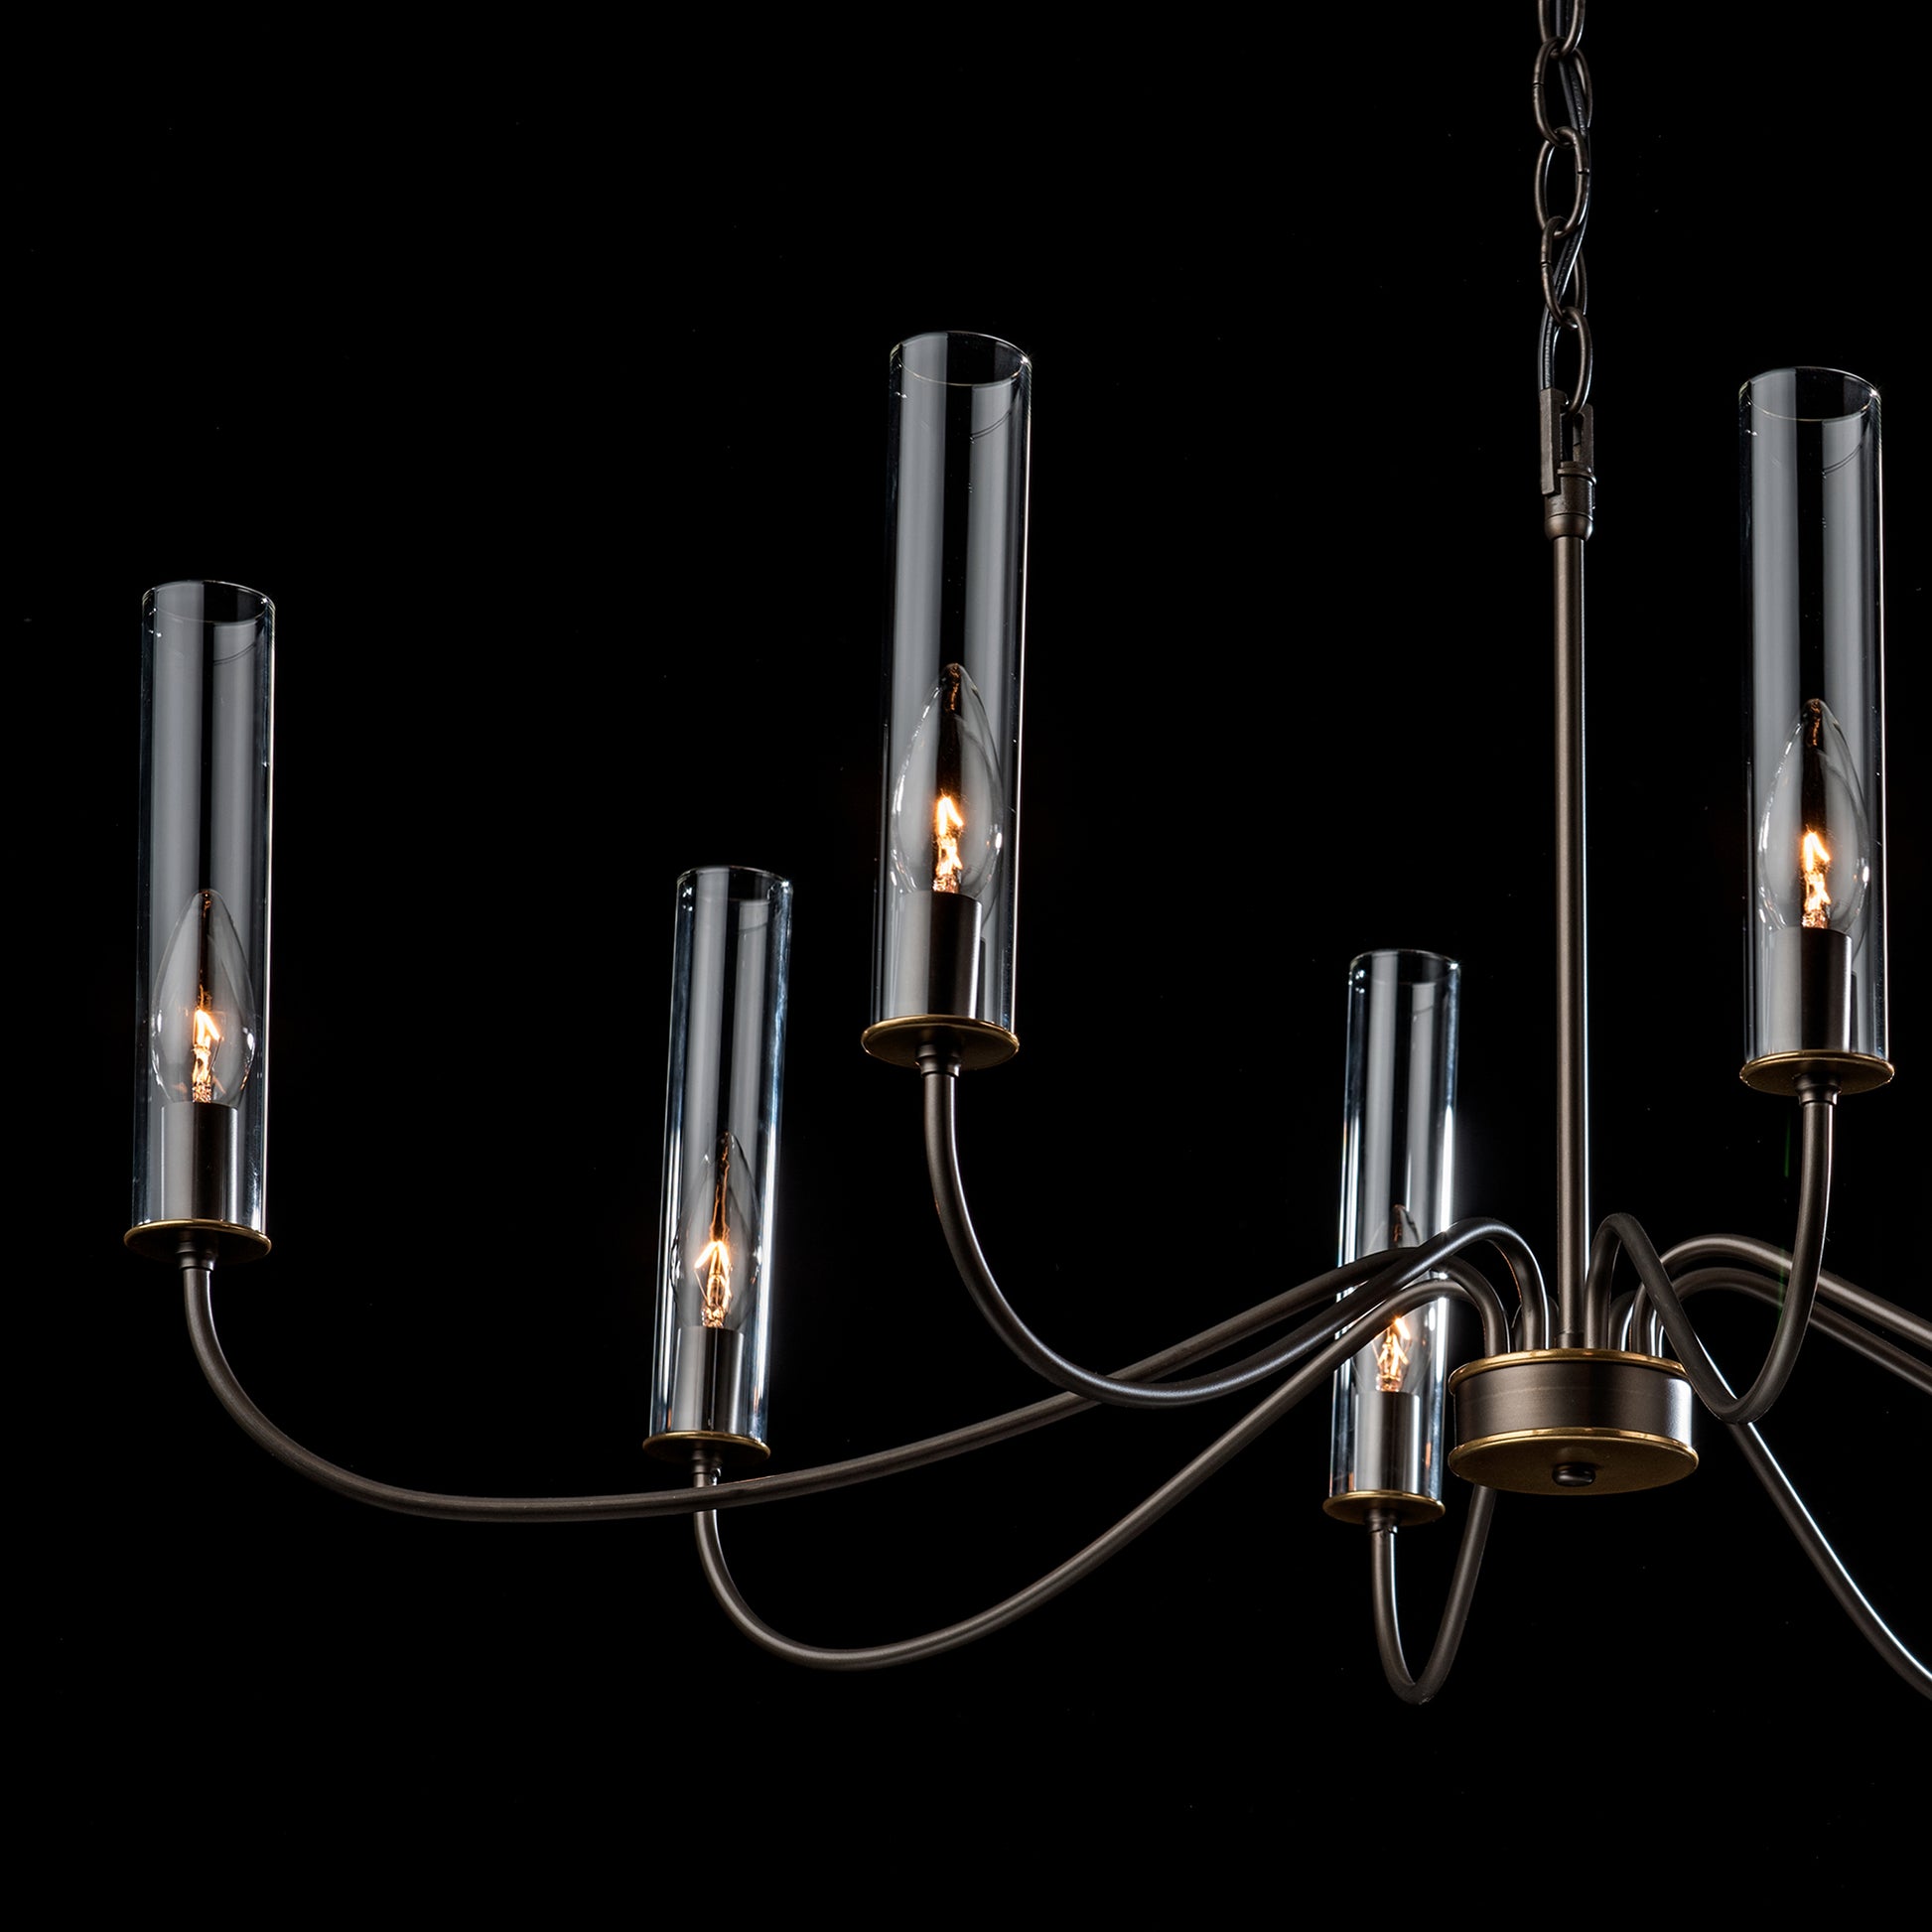 An artisan-crafted Grace 8-Arm Chandelier by Hubbardton Forge, featuring five glass cylinders, suspended elegantly against a contrasting black background.